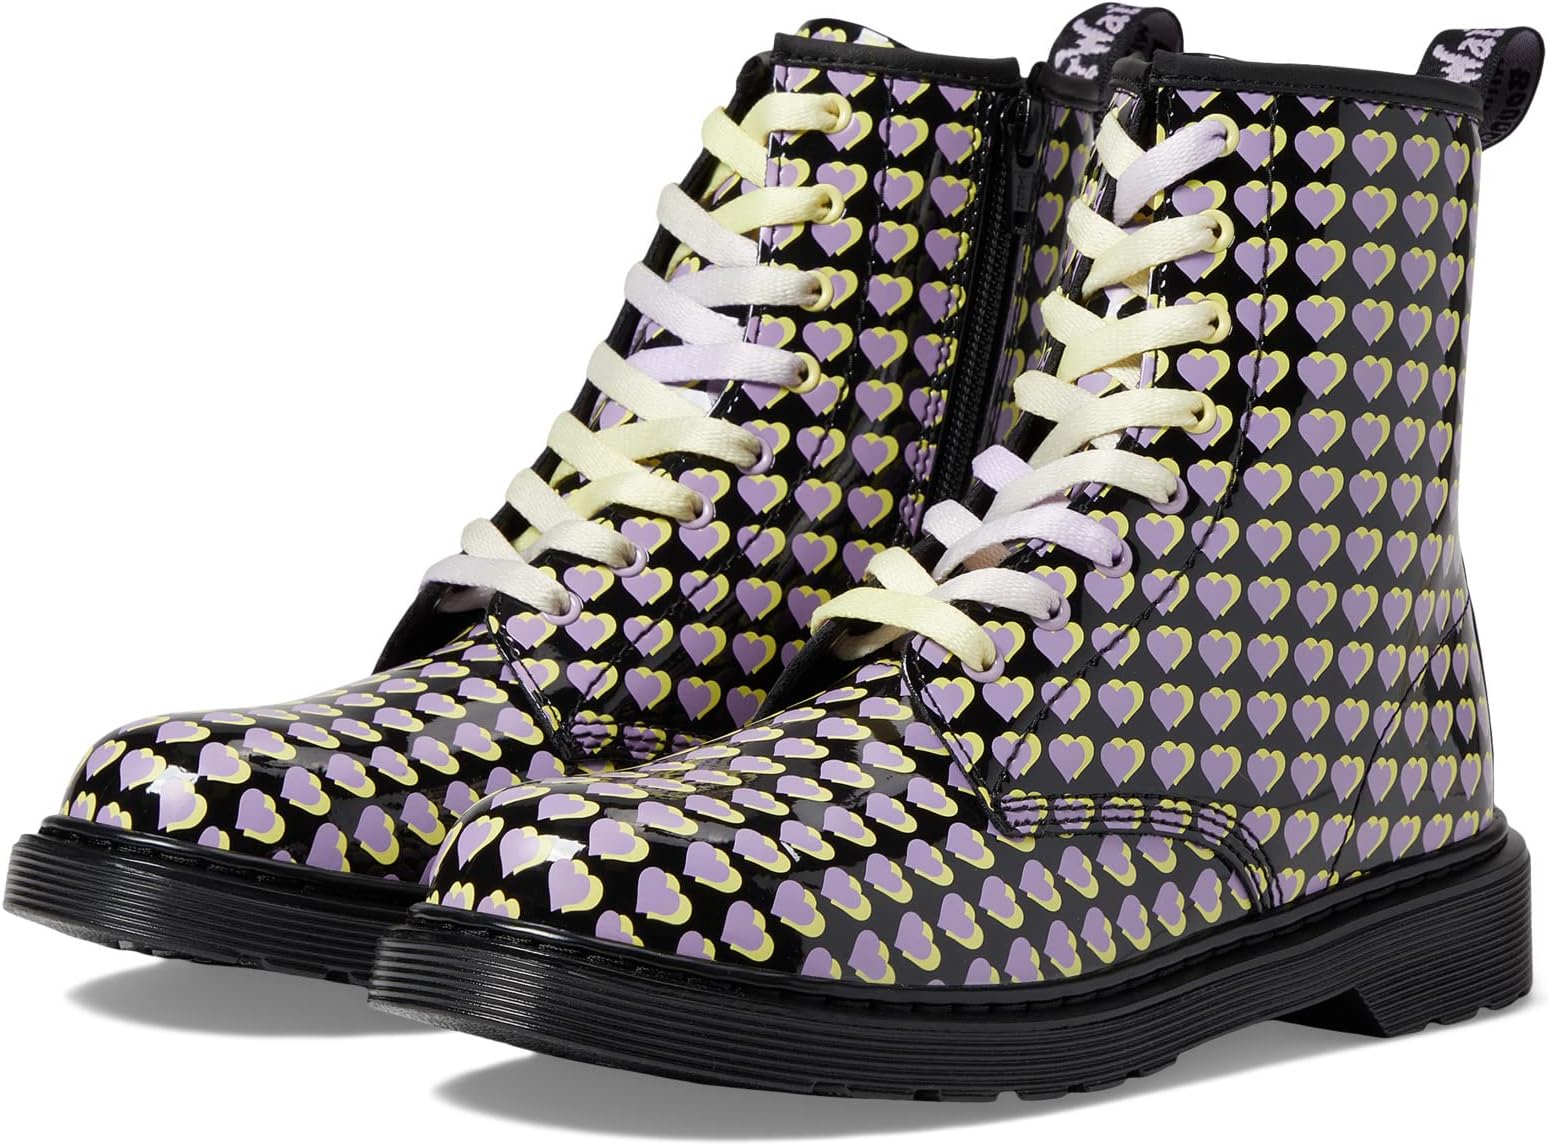 Ботинки на шнуровке 1460 Lace Up Fashion Boot Dr. Martens, цвет Heart Overlay Patent Lamper dr martens 1460 patent lamper